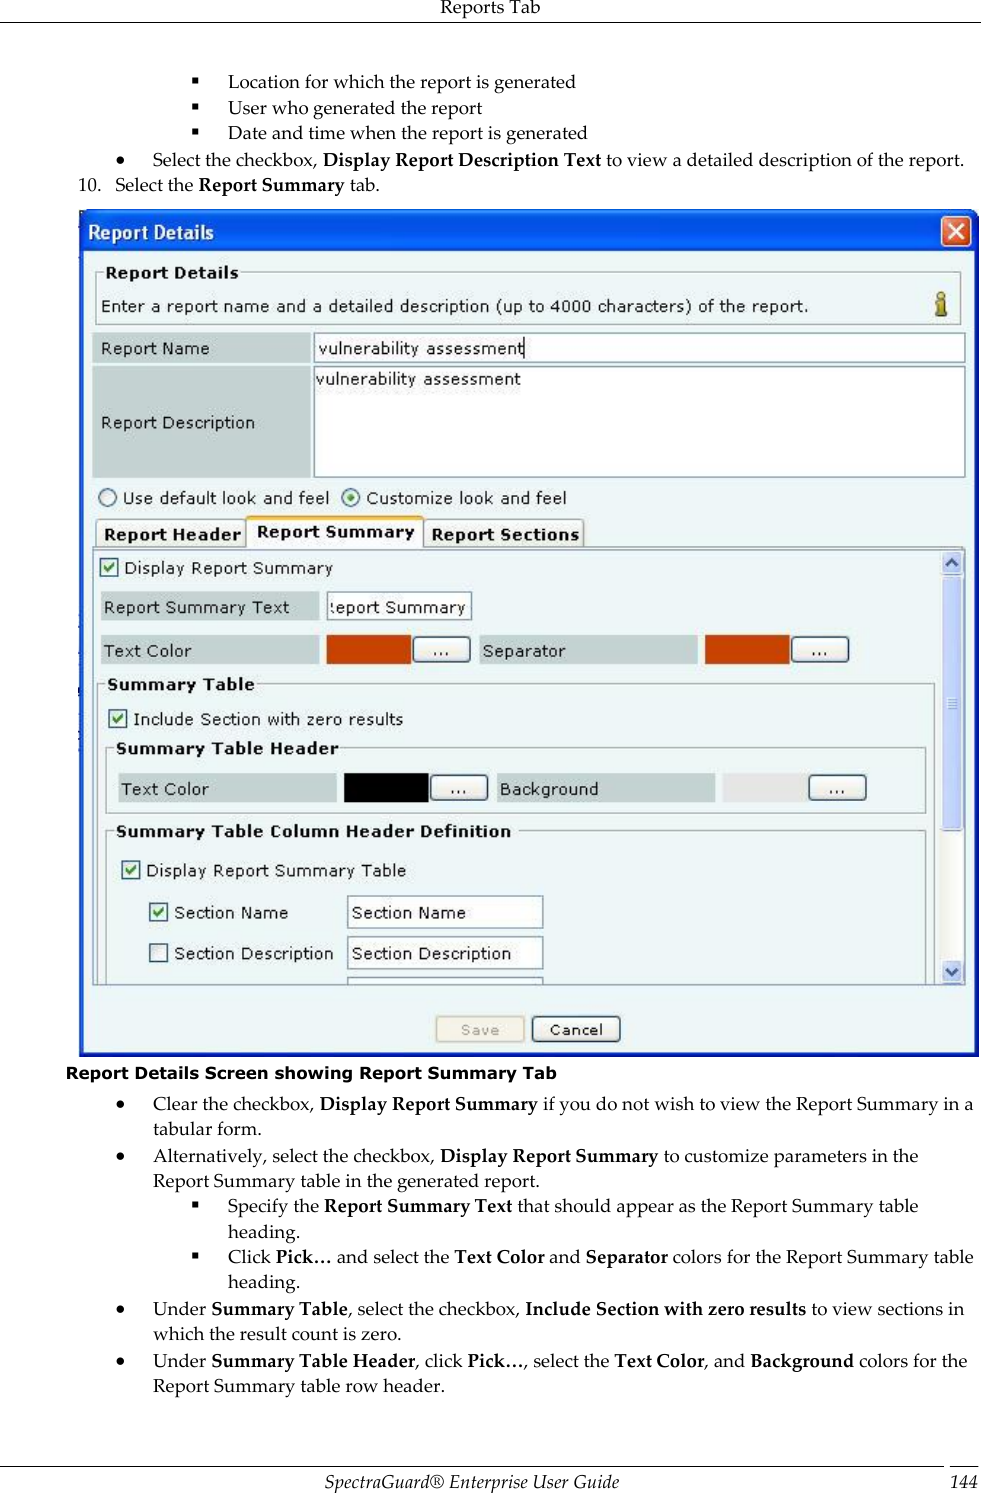 Reports Tab SpectraGuard®  Enterprise User Guide 144  Location for which the report is generated  User who generated the report  Date and time when the report is generated  Select the checkbox, Display Report Description Text to view a detailed description of the report. 10. Select the Report Summary tab.  Report Details Screen showing Report Summary Tab  Clear the checkbox, Display Report Summary if you do not wish to view the Report Summary in a tabular form.  Alternatively, select the checkbox, Display Report Summary to customize parameters in the Report Summary table in the generated report.  Specify the Report Summary Text that should appear as the Report Summary table heading.  Click Pick… and select the Text Color and Separator colors for the Report Summary table heading.  Under Summary Table, select the checkbox, Include Section with zero results to view sections in which the result count is zero.  Under Summary Table Header, click Pick…, select the Text Color, and Background colors for the Report Summary table row header. 